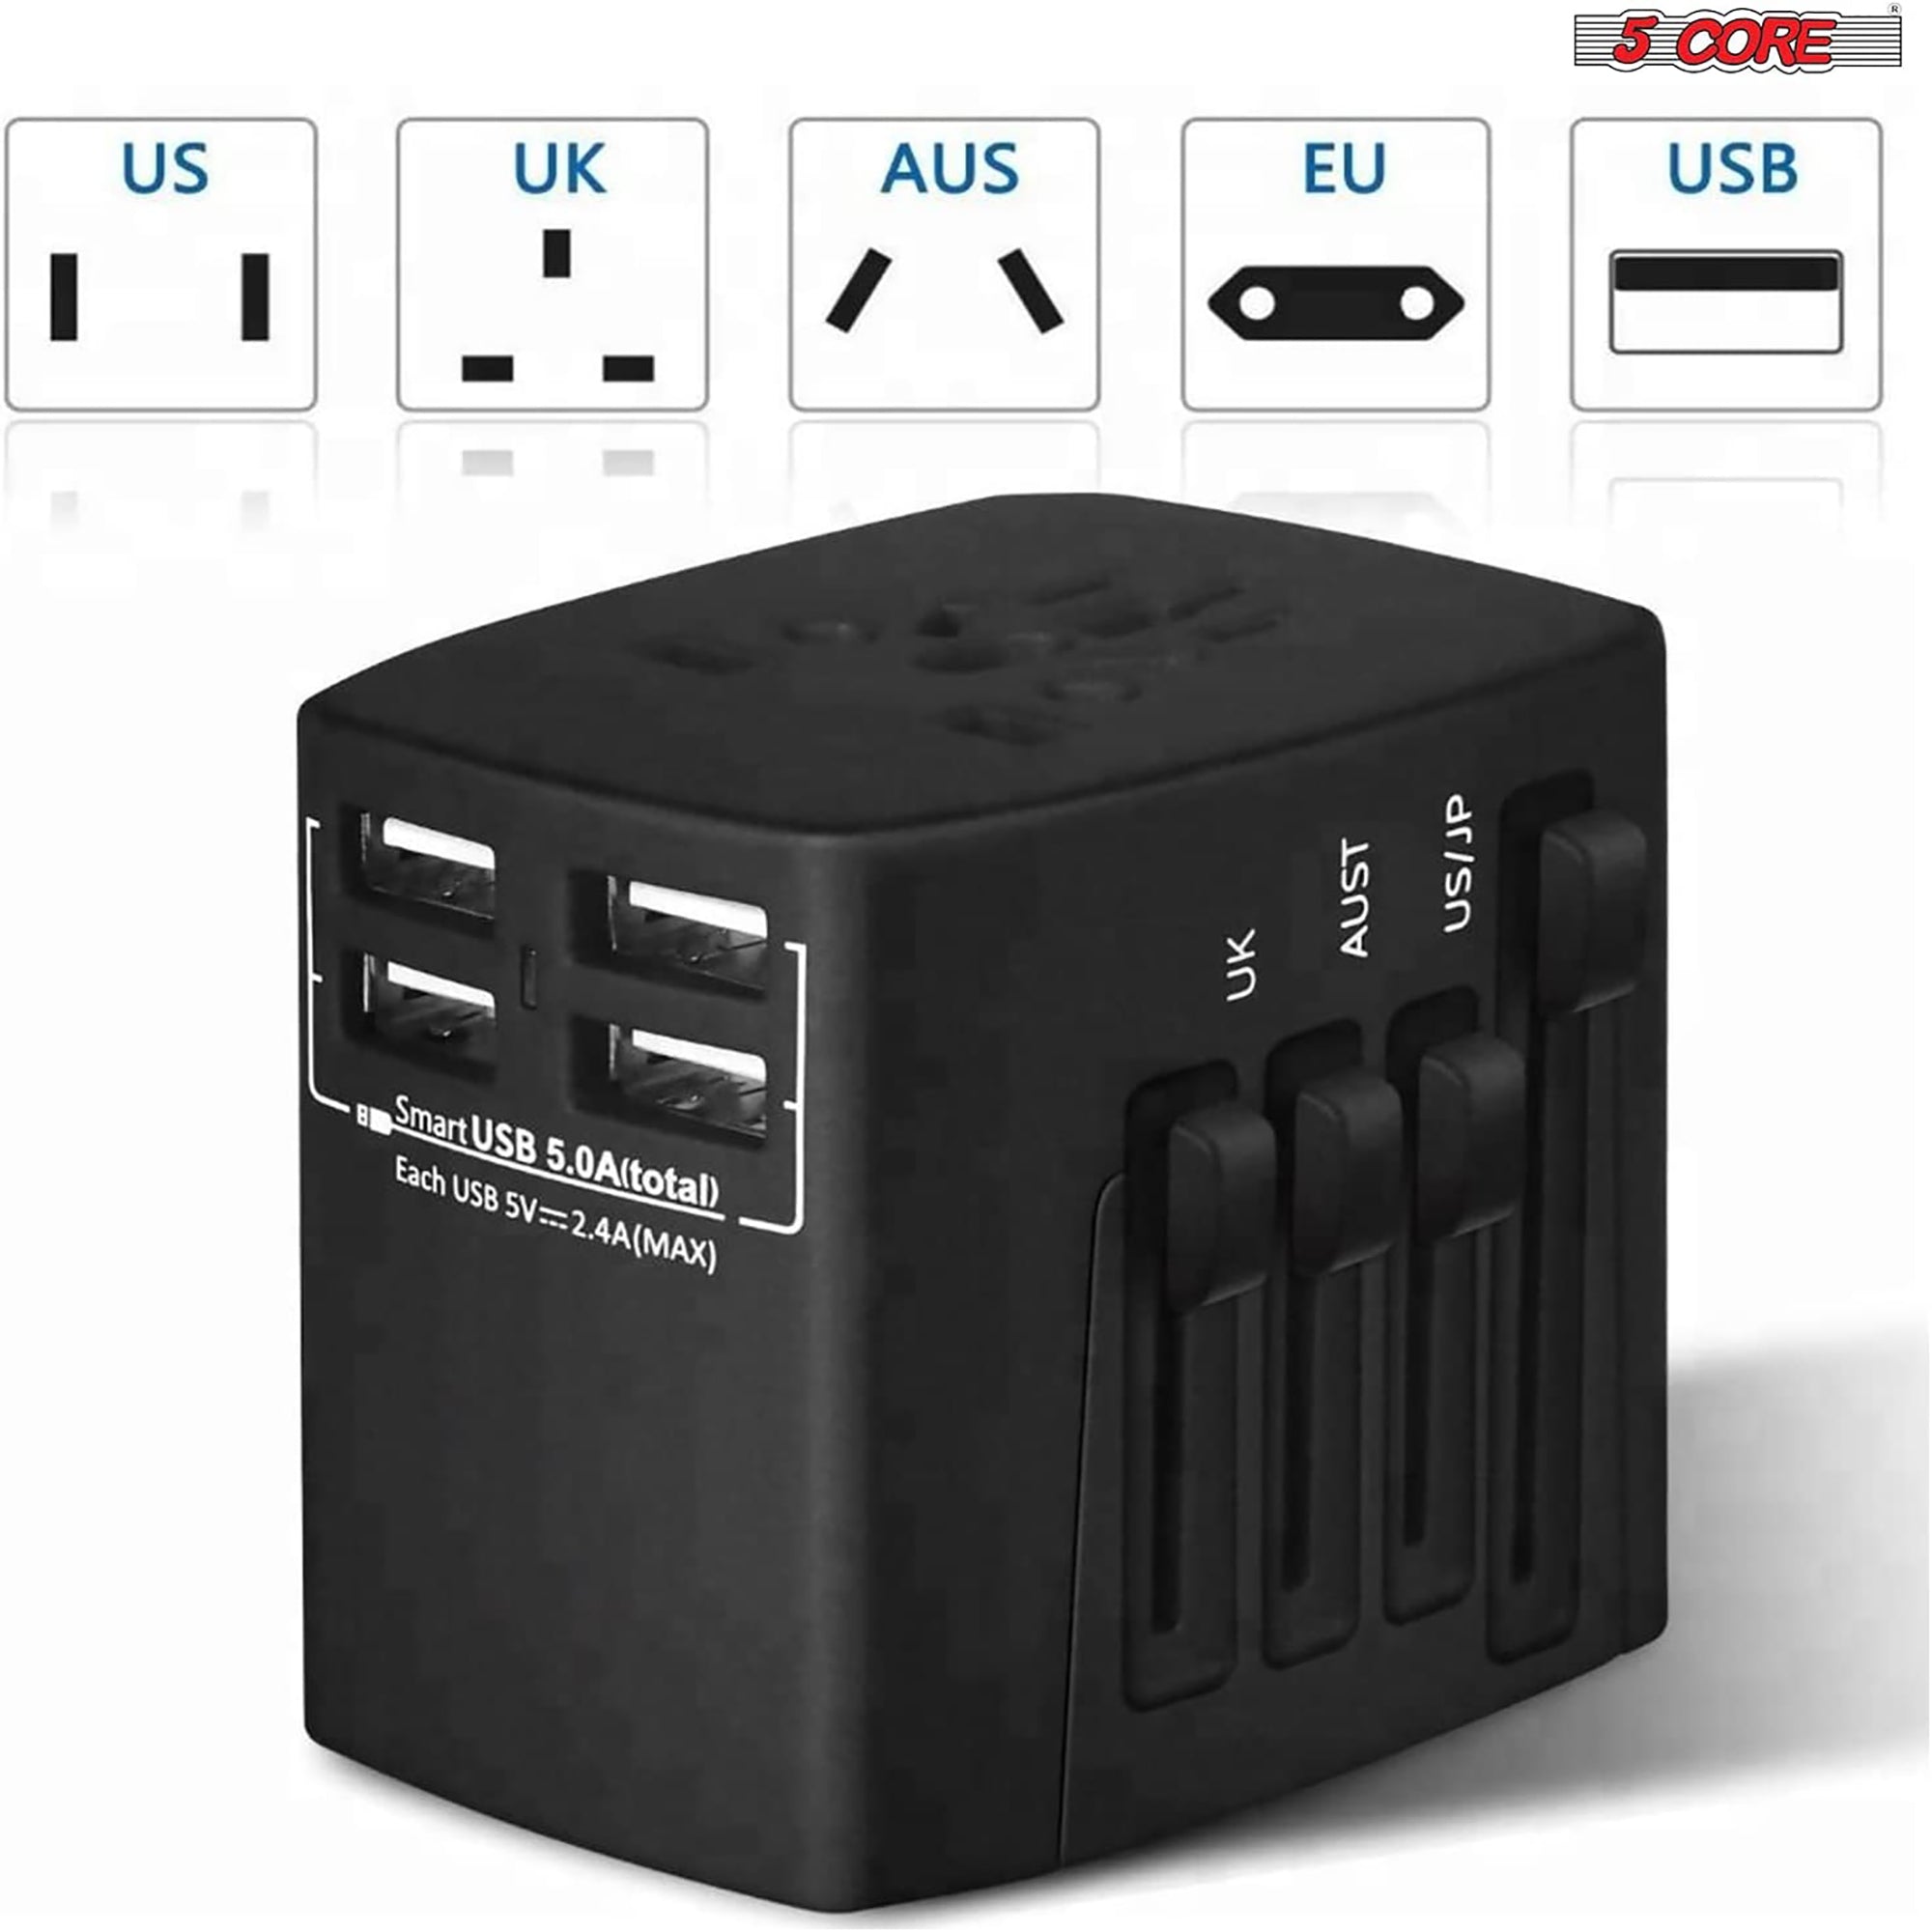 5 Core Travel Adapter 1 Piece Black International Power Adapter Plug Multi Outlet Port 4 USB Travel Charger Universal AC Plug Outlet Adapter- UTA B